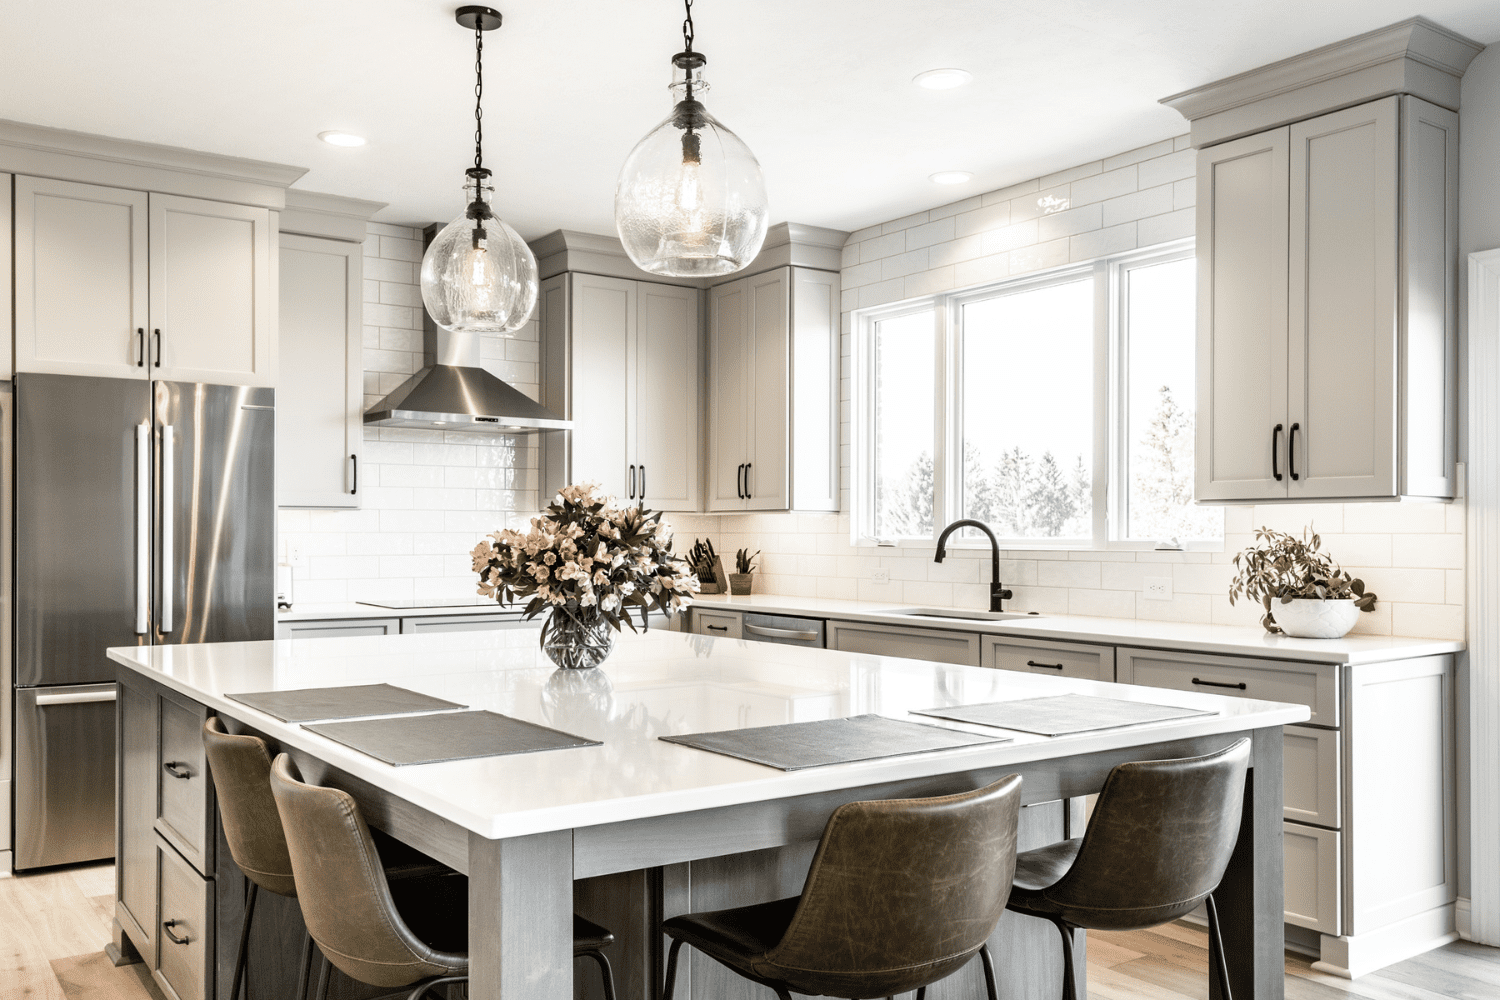 Nicholas Design Build | A kitchen with a large island and chairs.